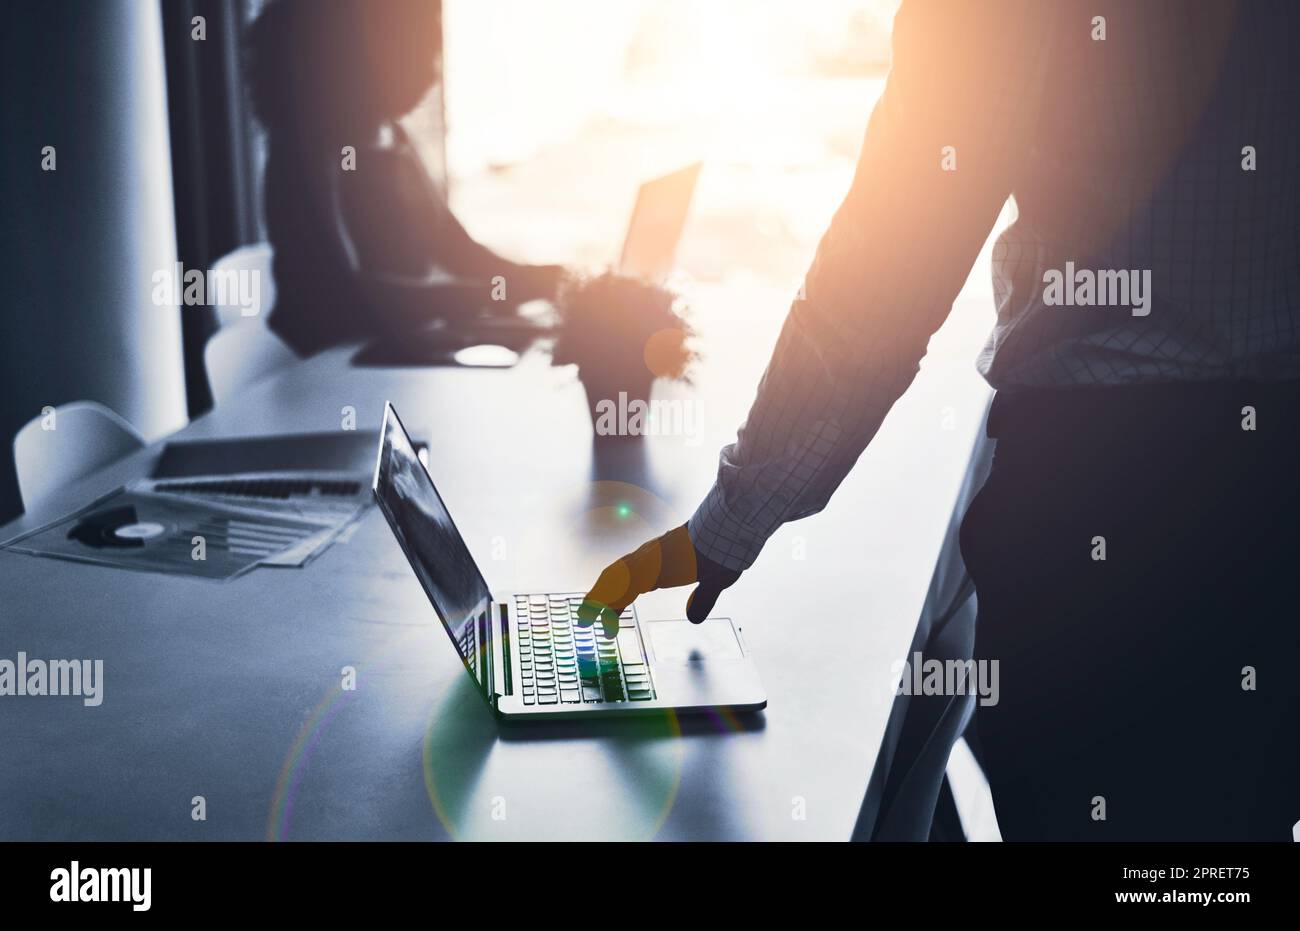 Silhouette of a business man hand working on a laptop at an IT company and having a meeting in an office. A male employee typing in a dark boardroom during a meeting or presentation Stock Photo